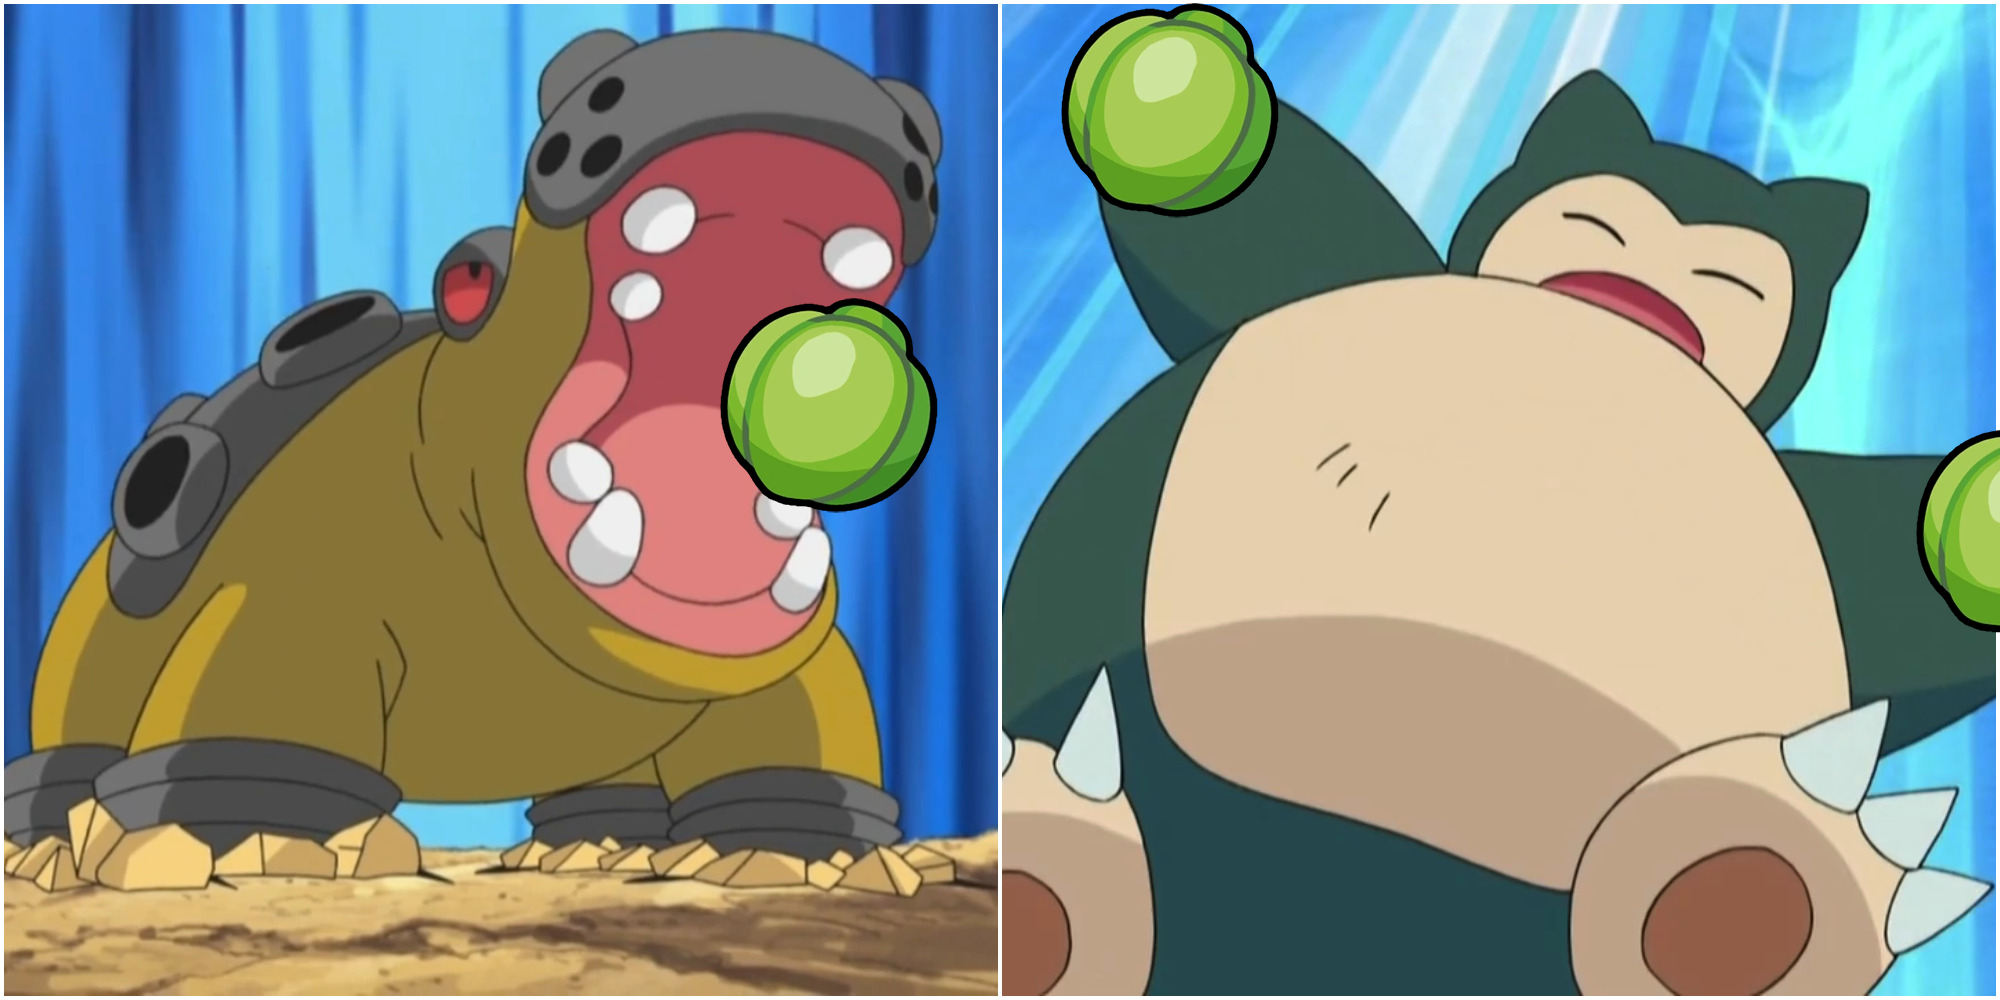 BDSP Hippowdon and Snorlax in Battle with Lum Berries